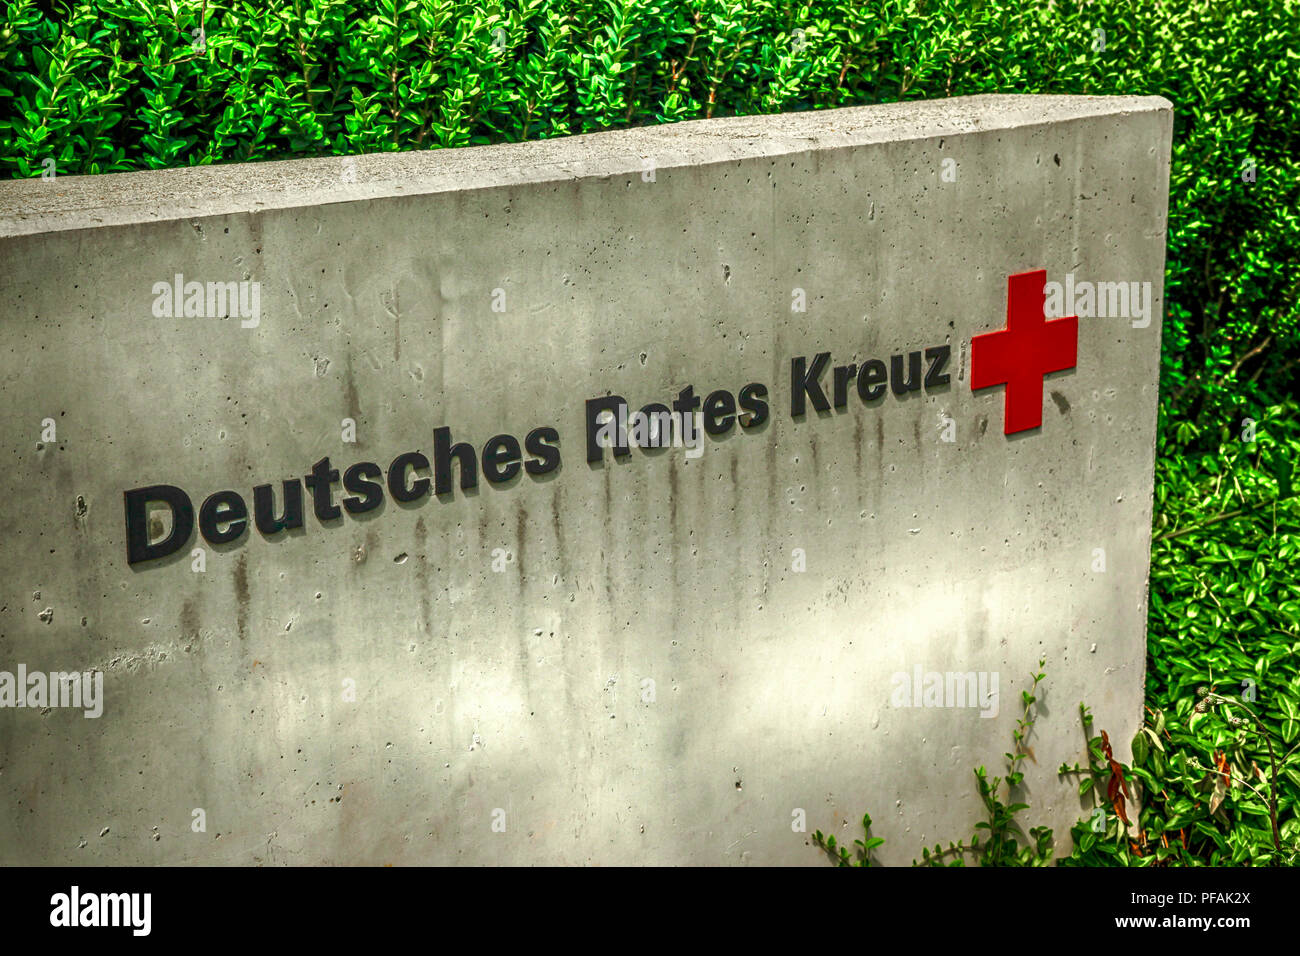 The concrete sign for the German Red Cross, or the Deutsches Rotes Kreuz located outside an ambulance station in Ulm, Germany. Stock Photo